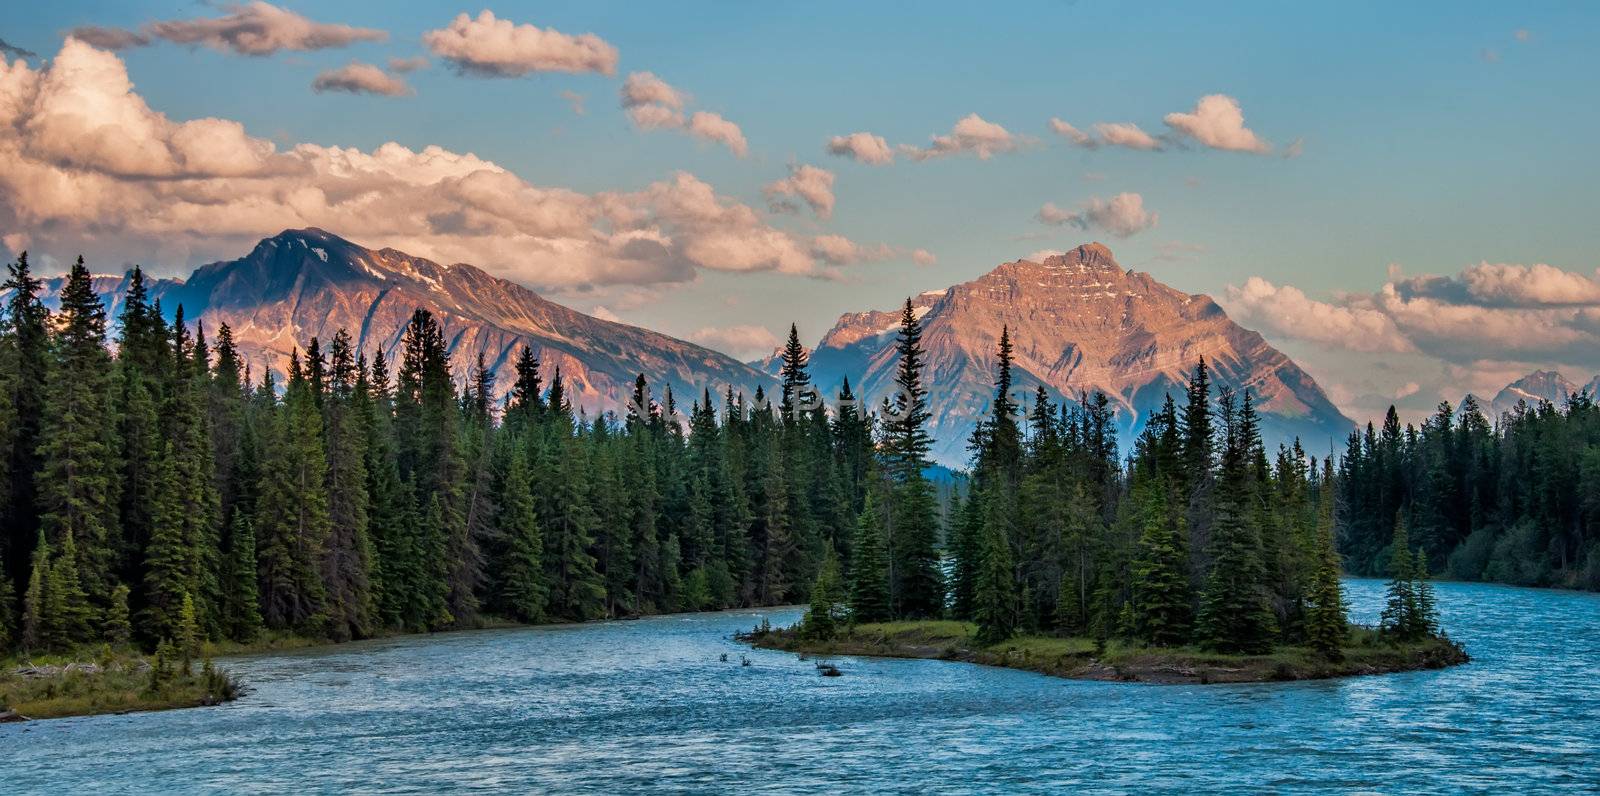 Photo of the mountains and forest behind the Athabasca River in Jasper National Park.